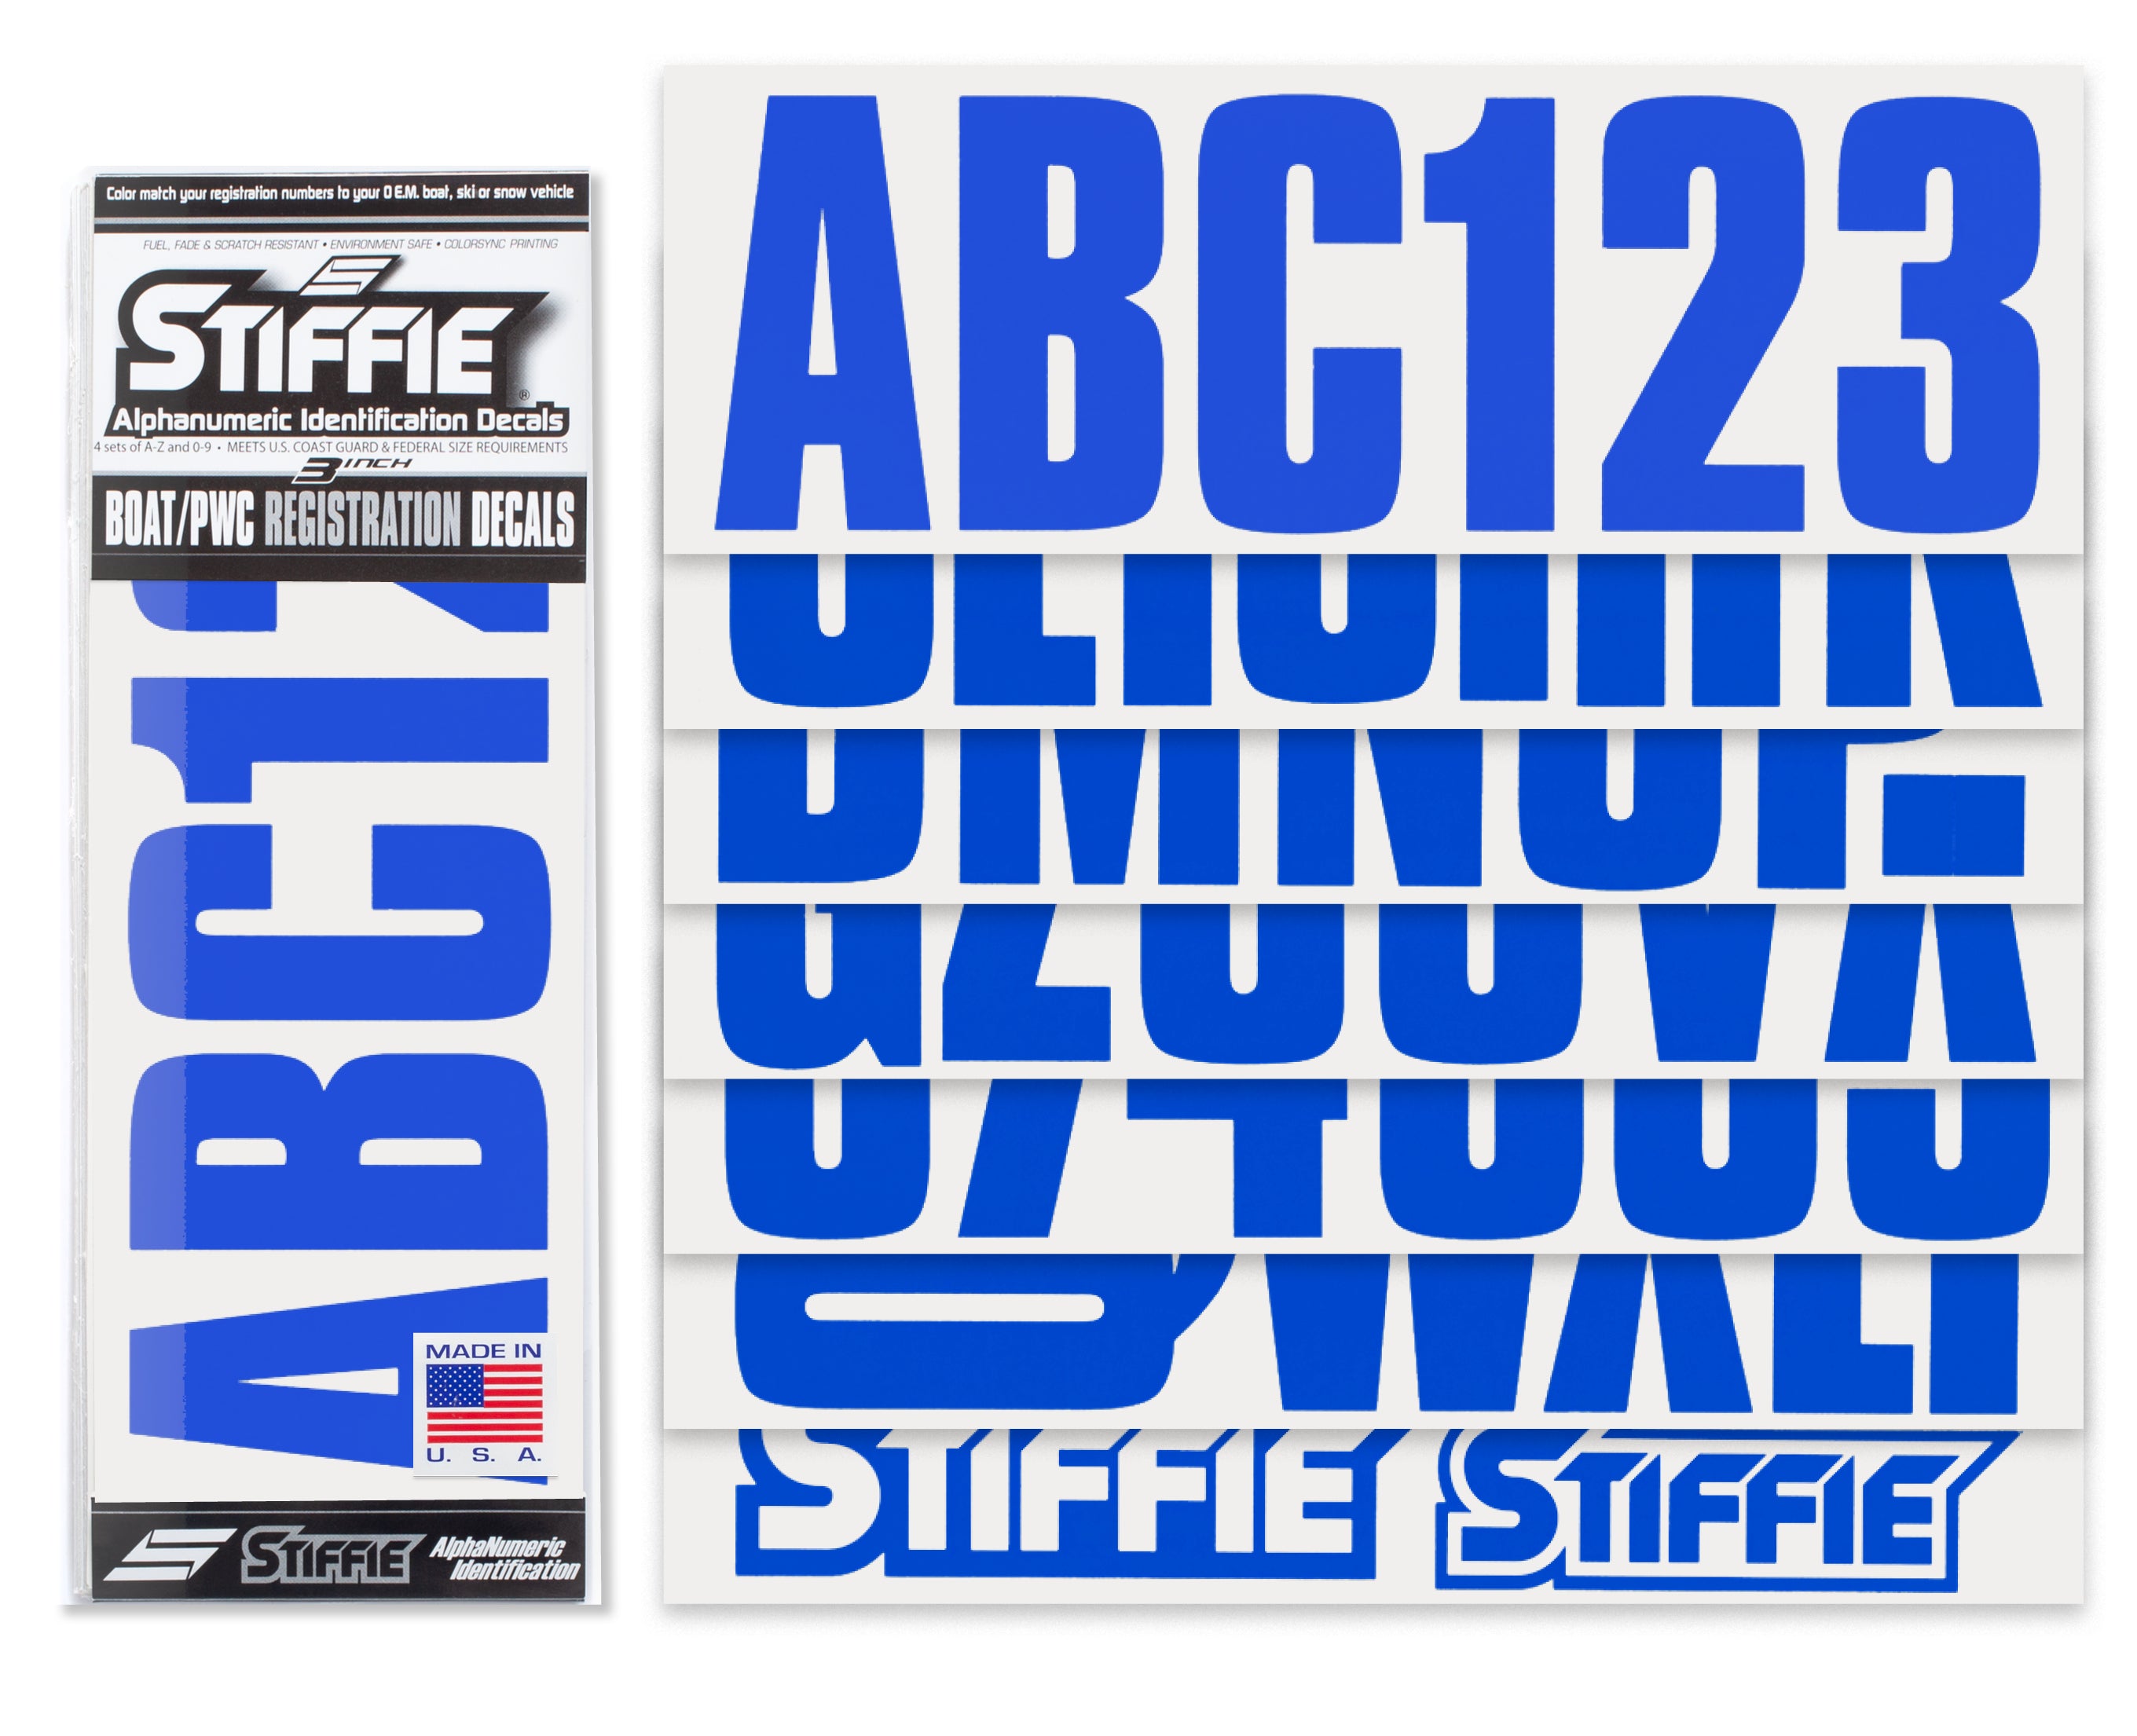 STIFFIE Uniline Blue 3" ID Kit Alpha-Numeric Registration Identification Numbers Stickers Decals for Boats & Personal Watercraft